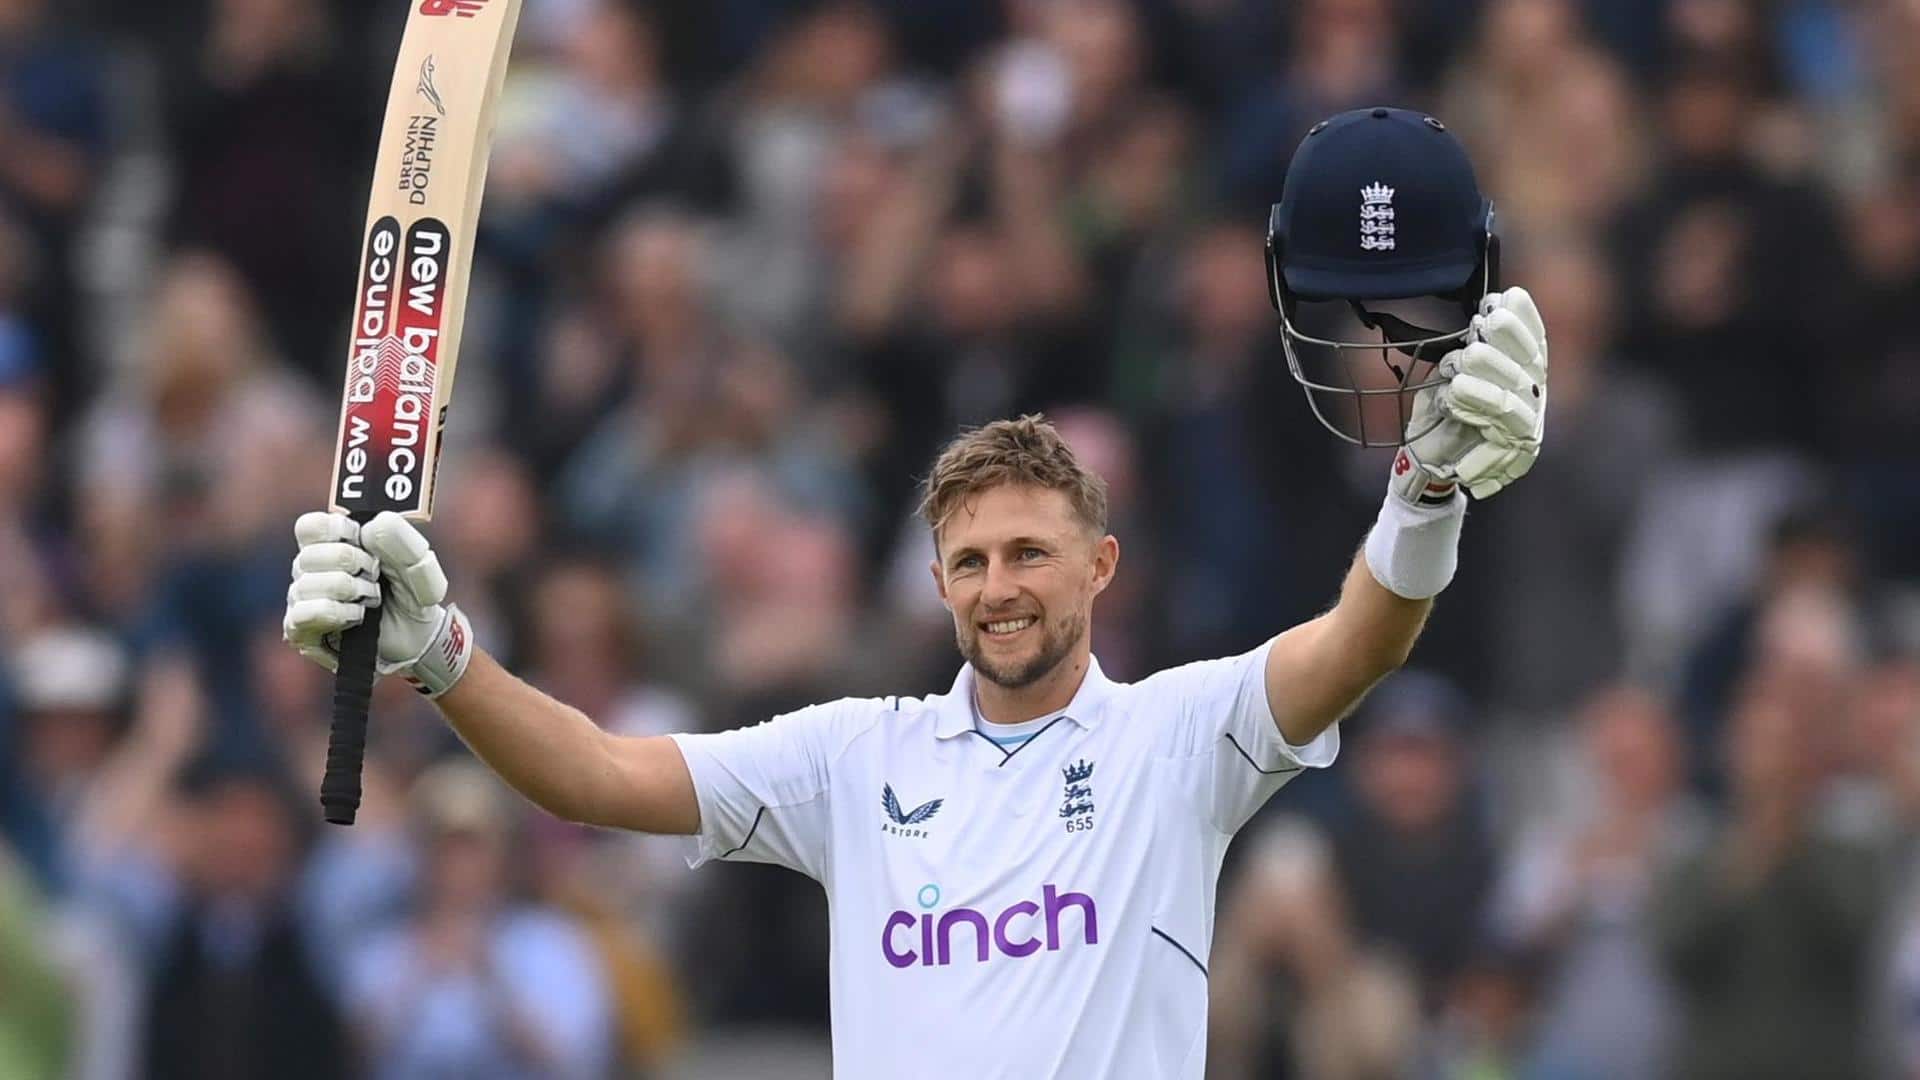 Joe Root averages over 52 at Lord's in Tests: Stats